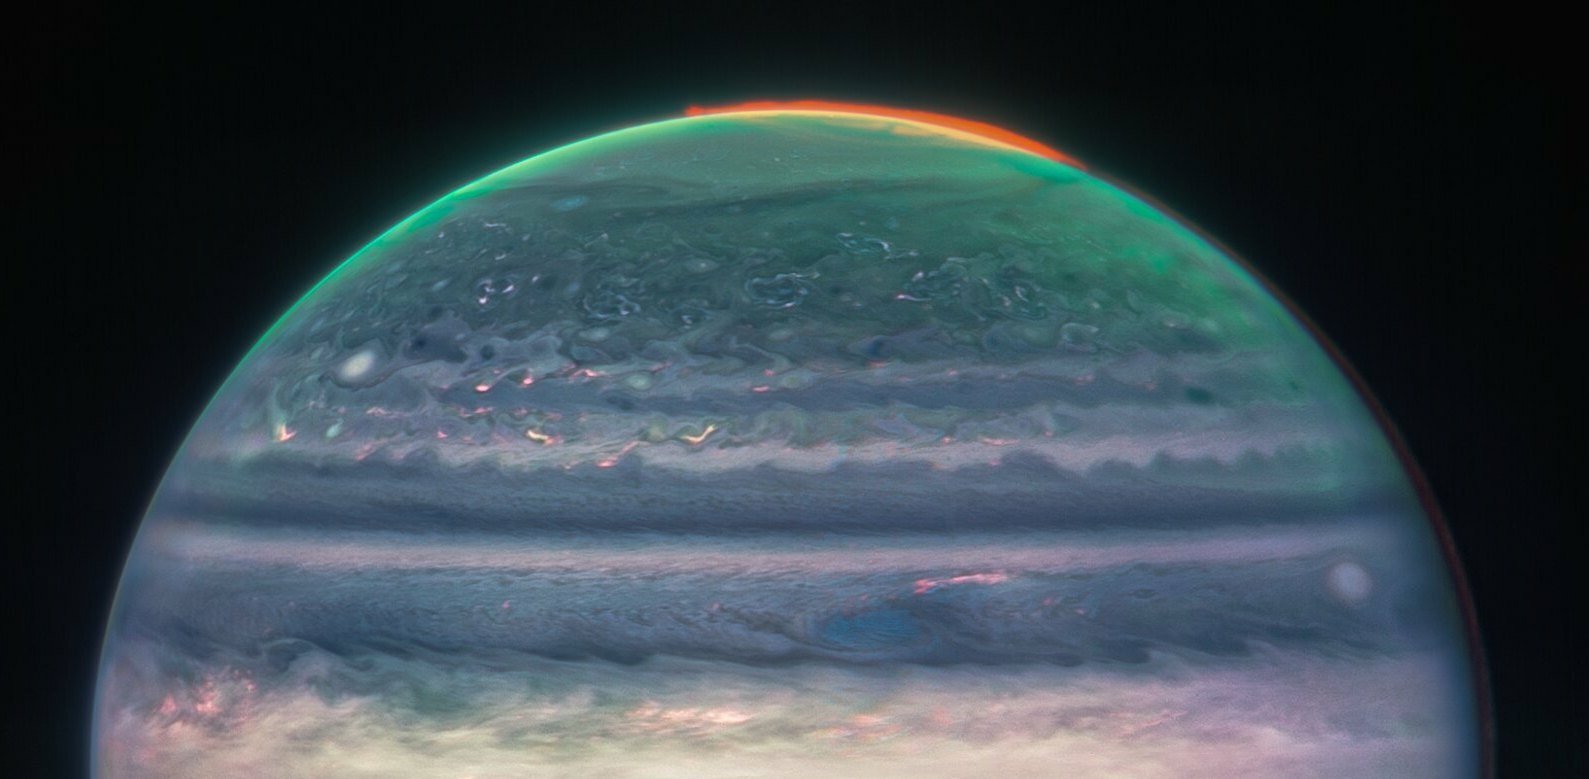 New James Webb image lets us see Jupiter for the trippy place it is